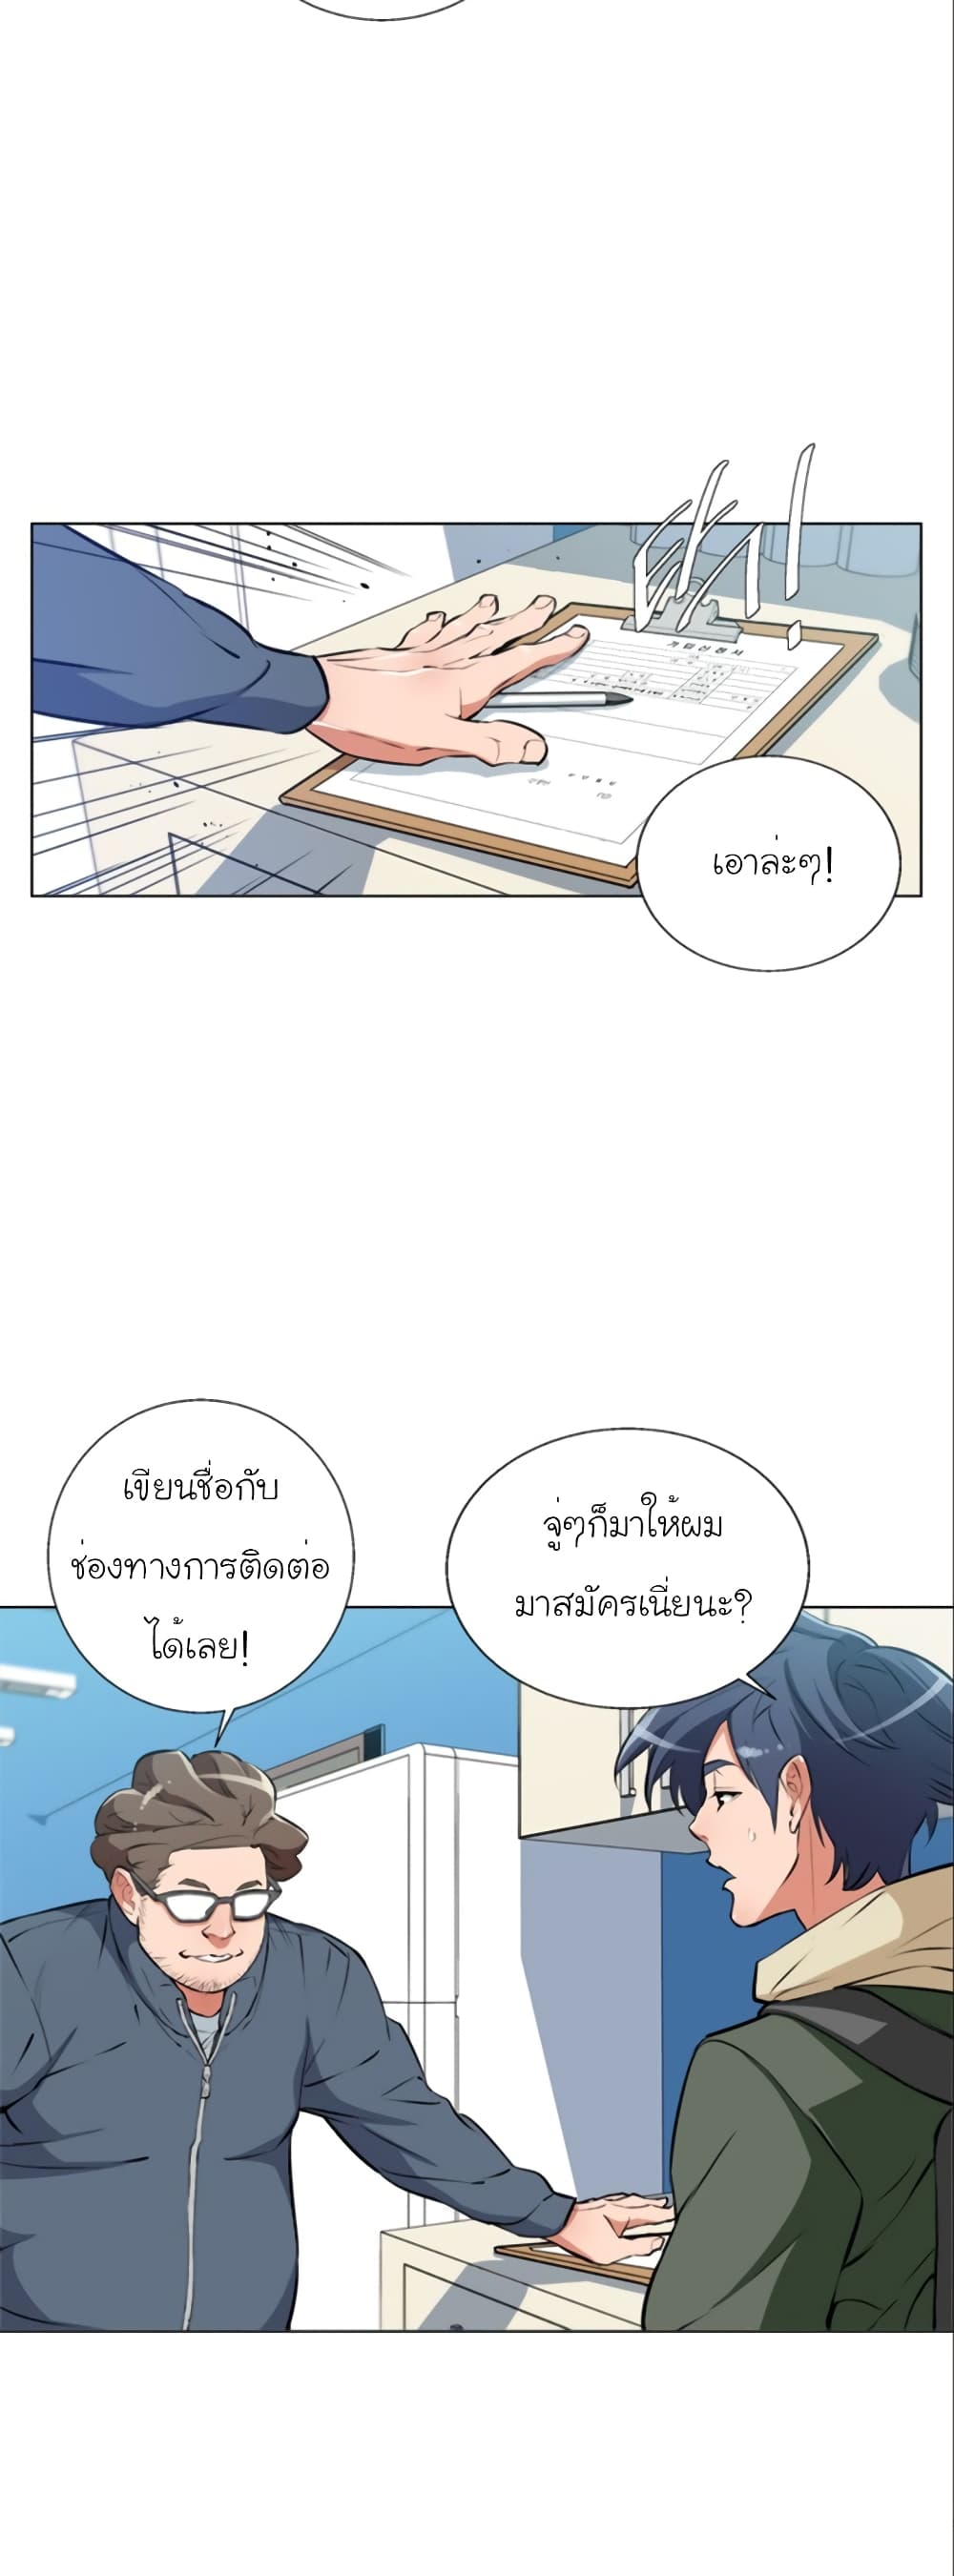 I Stack Experience Through Reading Books ตอนที่ 57 (18)